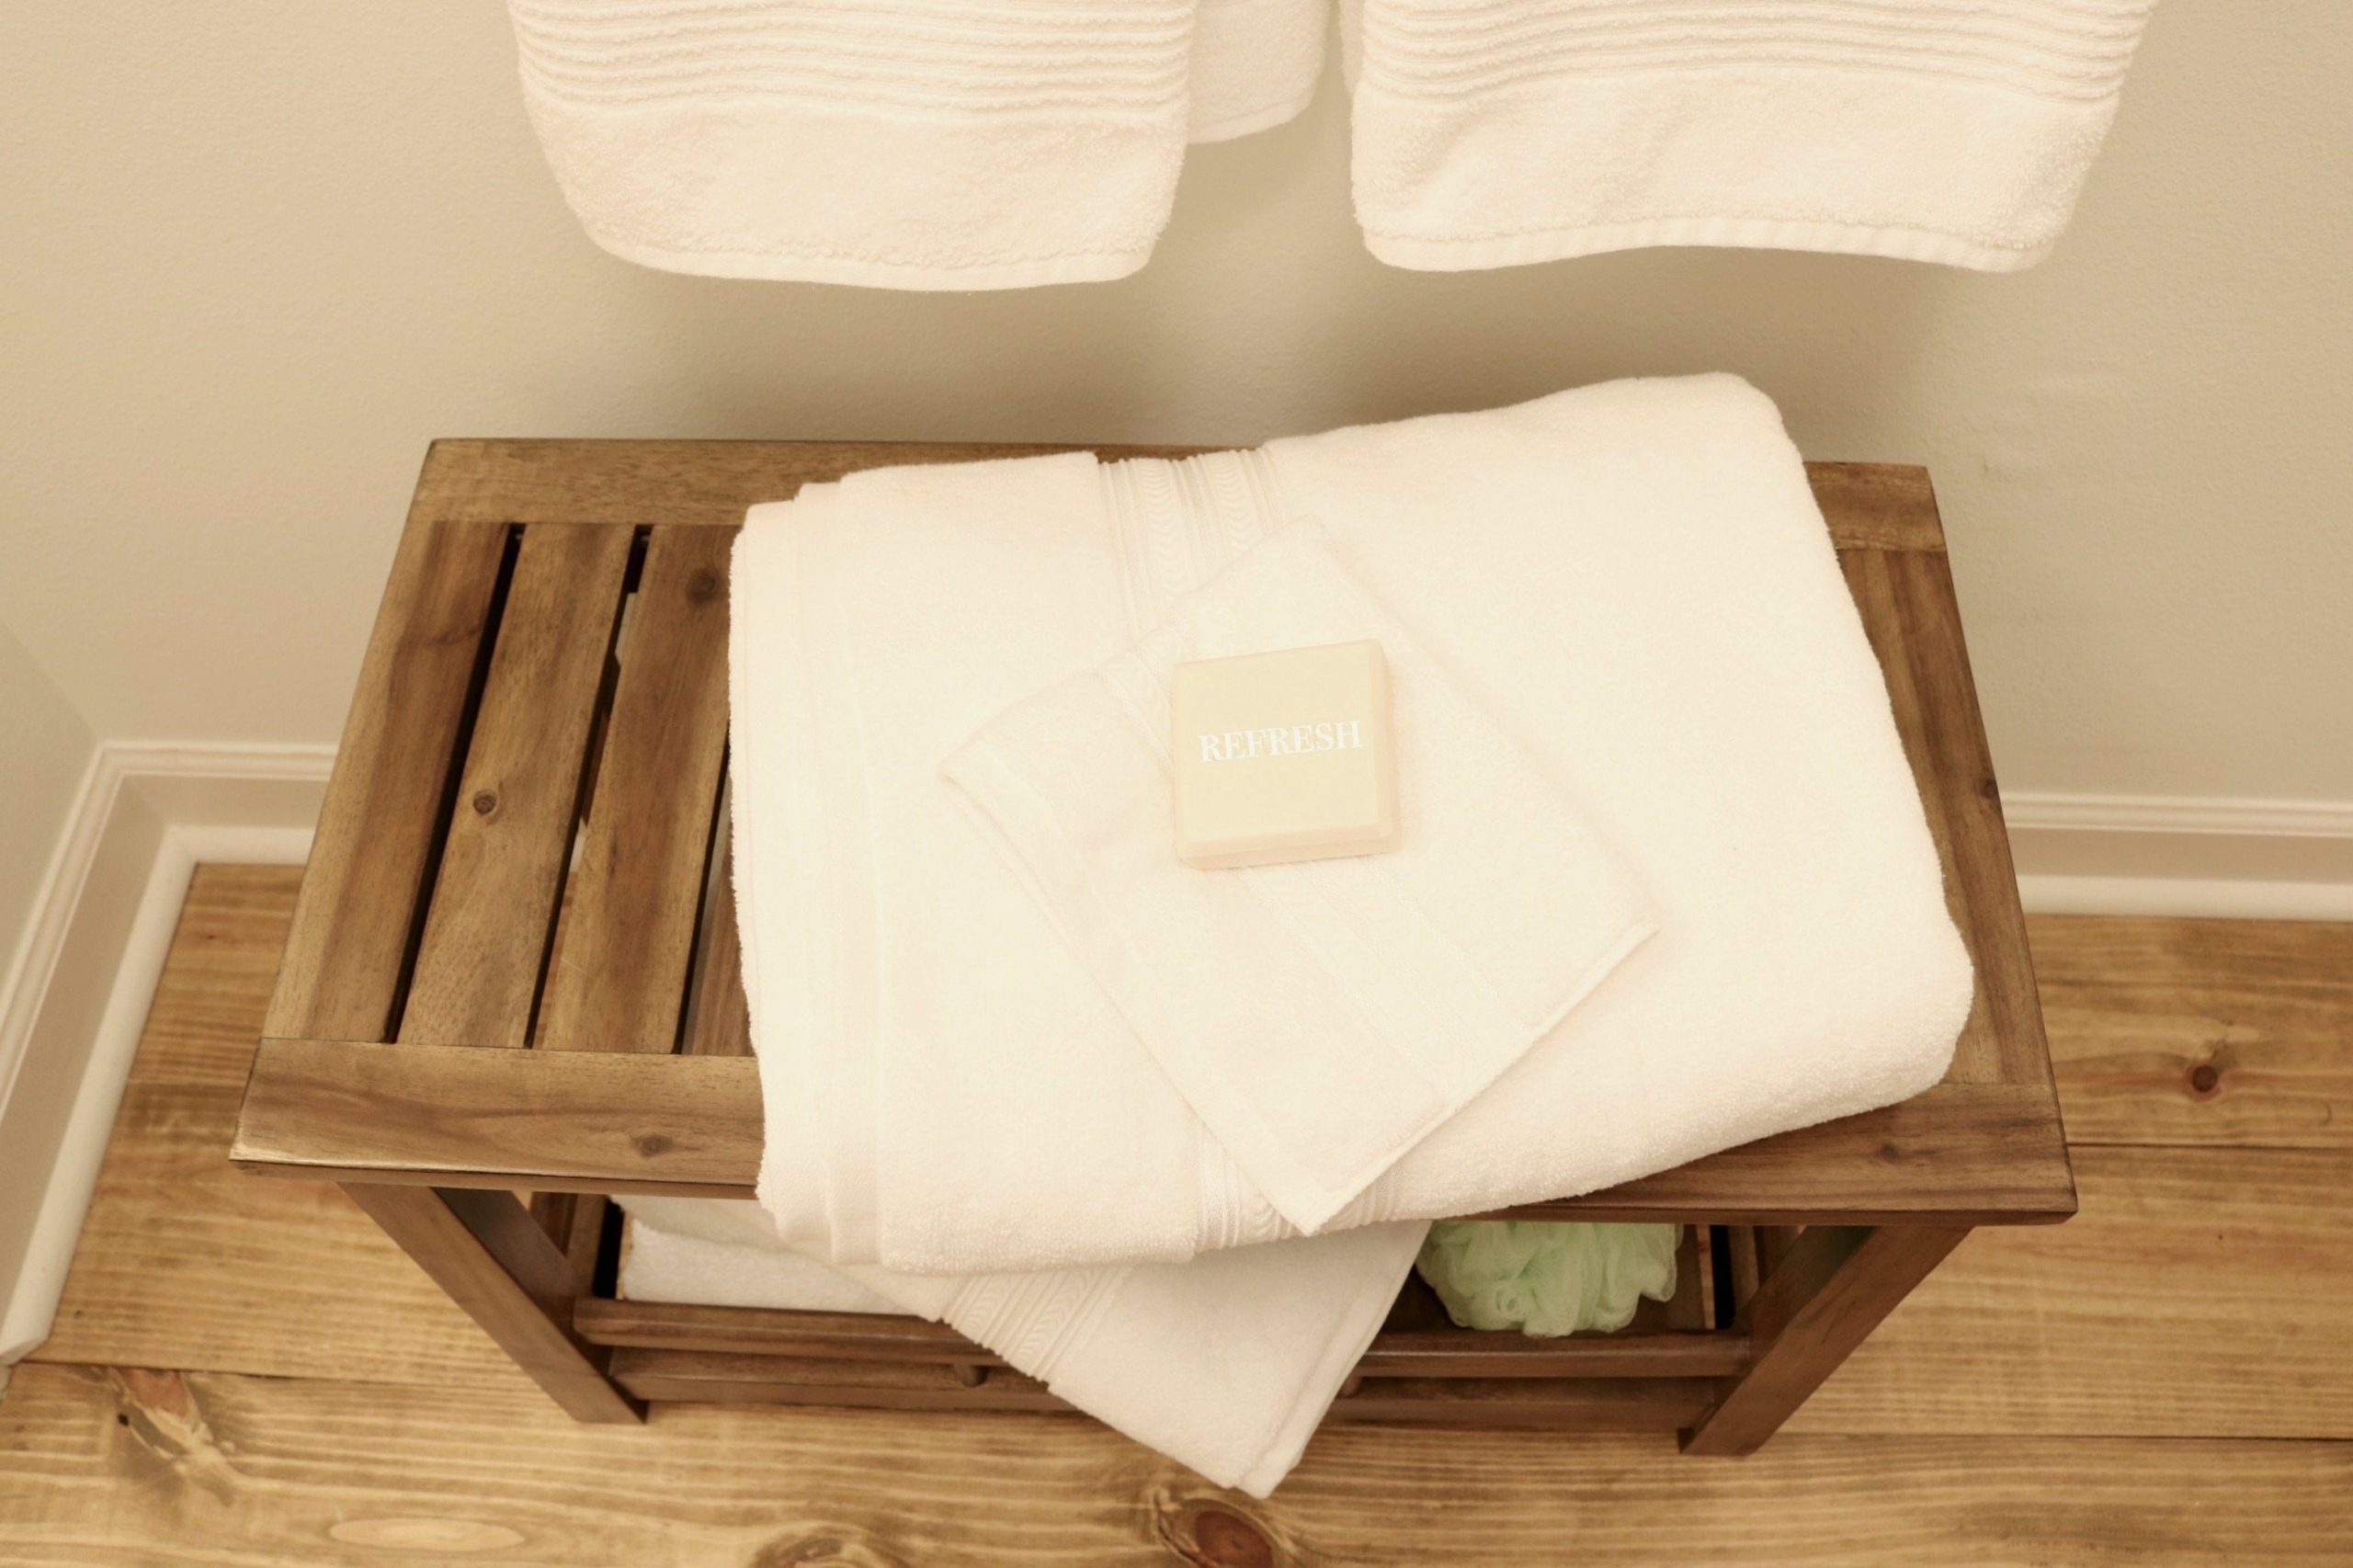 Plenty of white towel and sweet smelling soap for the minimal farmhouse bath